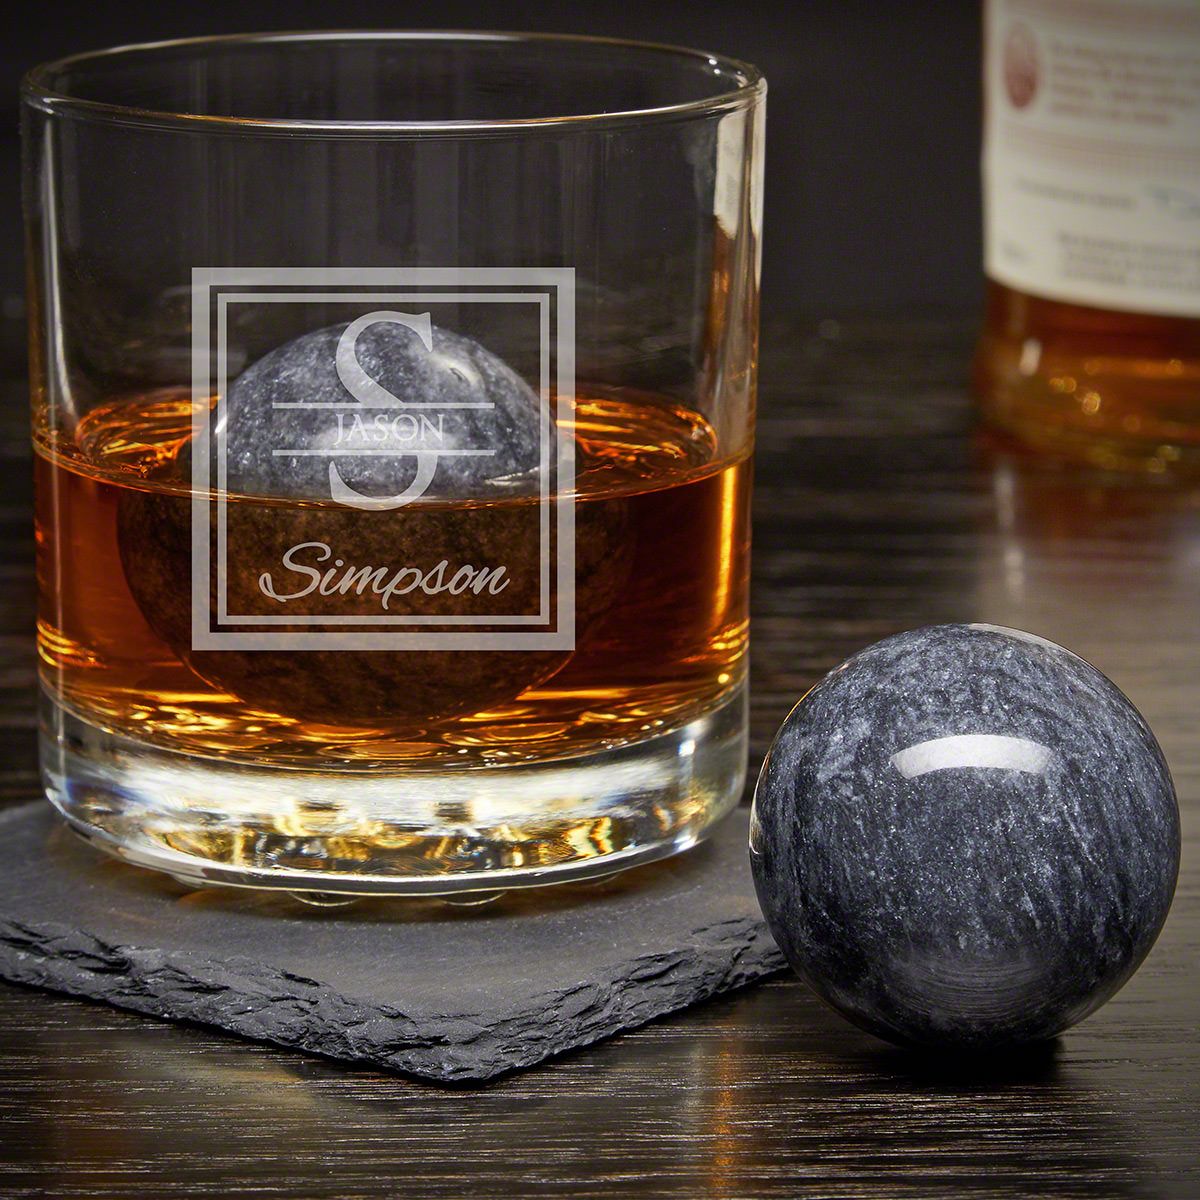 https://images.homewetbar.com/media/catalog/product/7/8/7875-oakhill-buckman-glass-with-perfect-sphere-whiskey-rocks.jpg?store=default&image-type=image